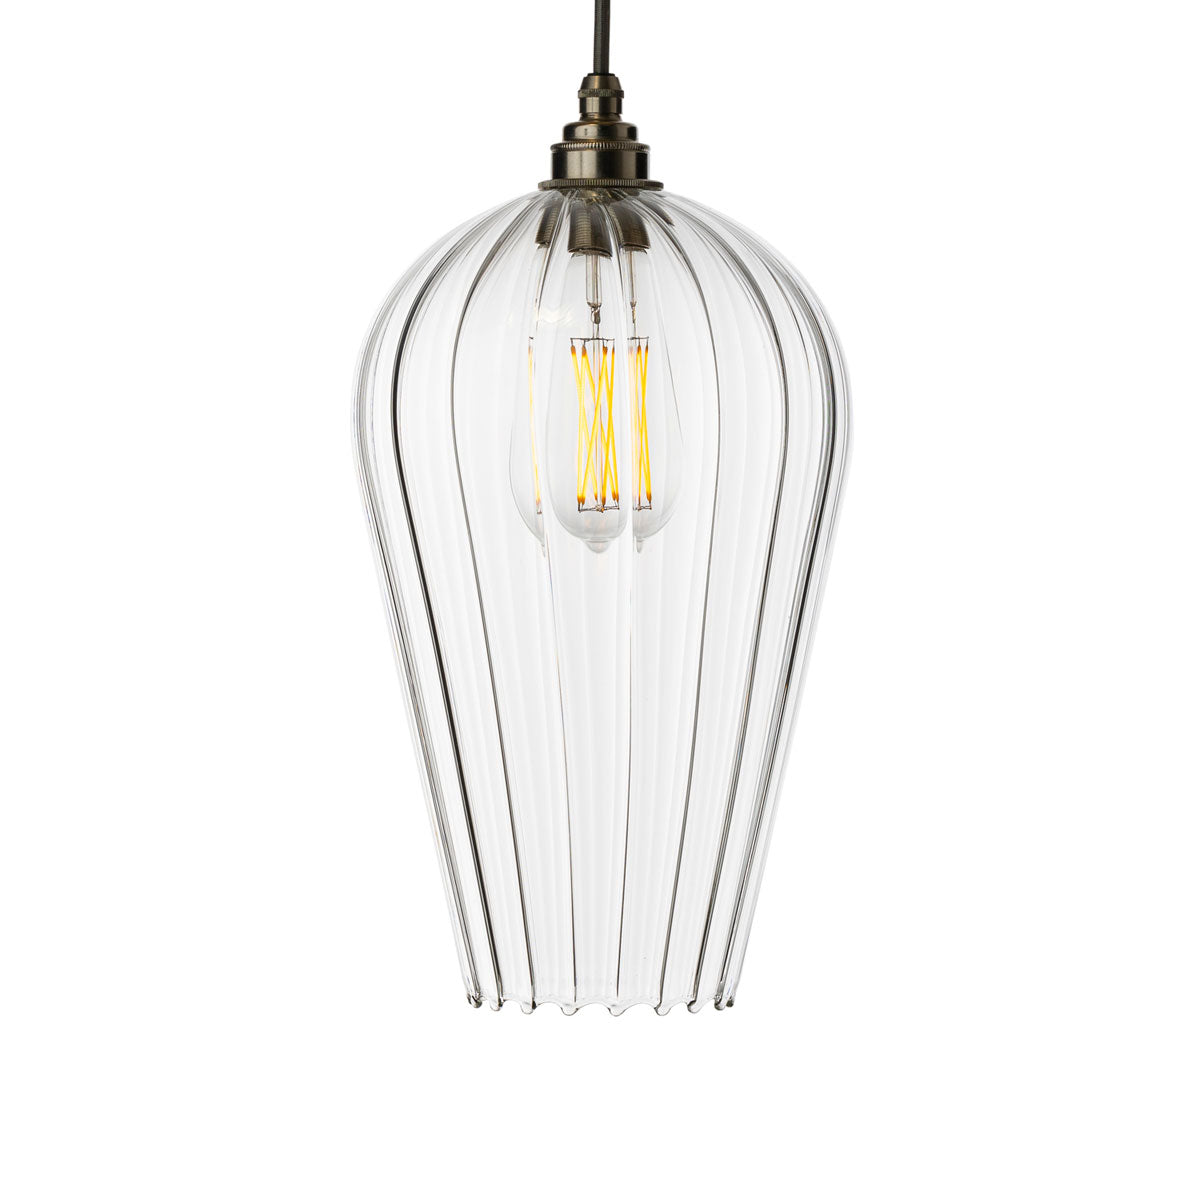 Fluted glass pendant light sold by South Charlotte Fine Lighting